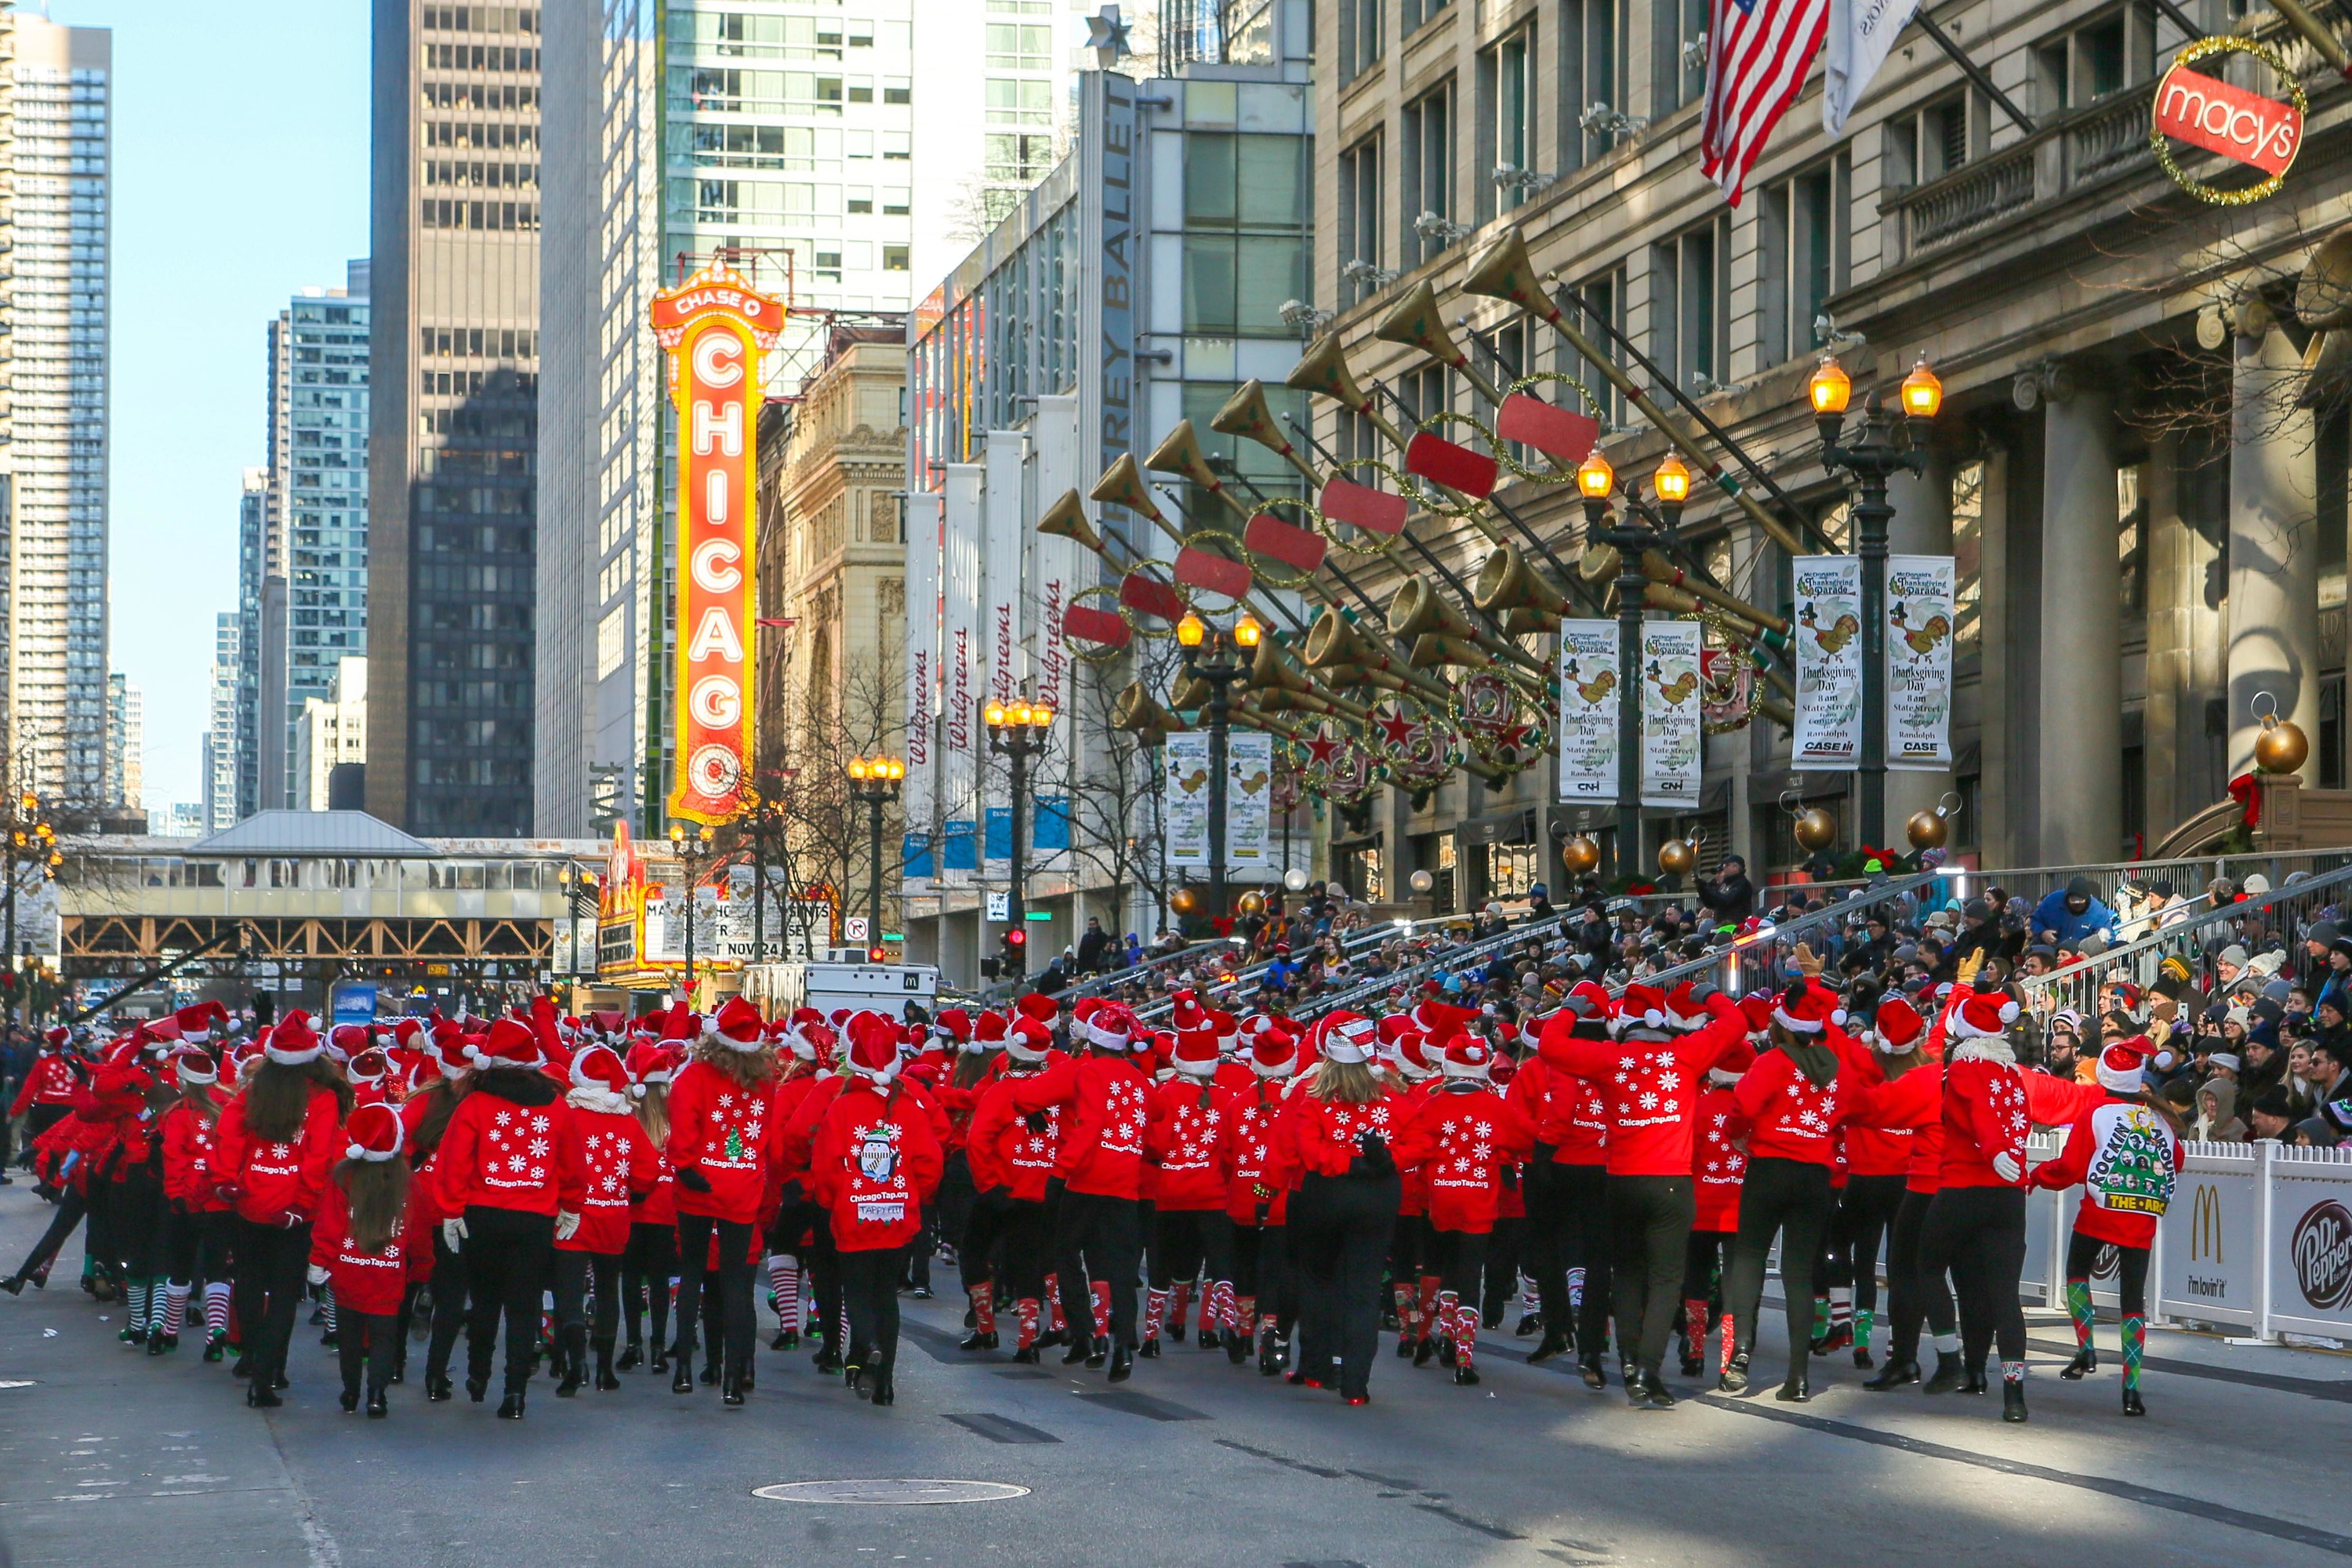 Photos from the Chicago Thanksgiving Parade